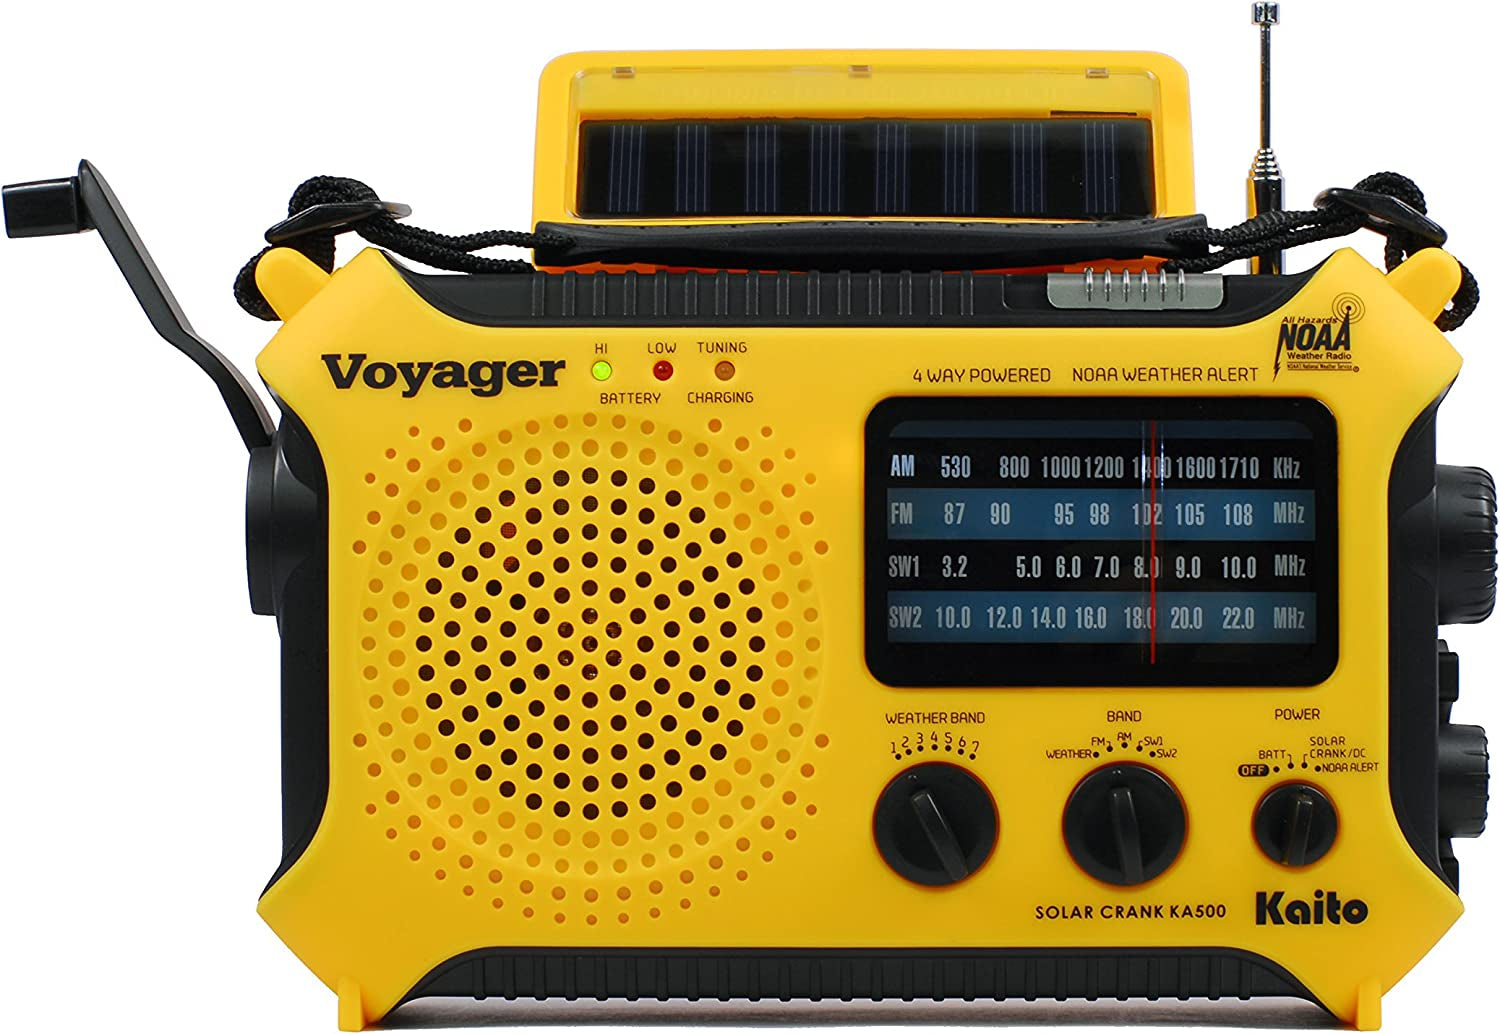 KA500 5-Way Powered Solar Power,Dynamo Crank, Wind up Emergency AM/FM/SW/NOAA Weather Alert Radio with Flashlight,Reading Lamp and Cellphone Charger, Yellow